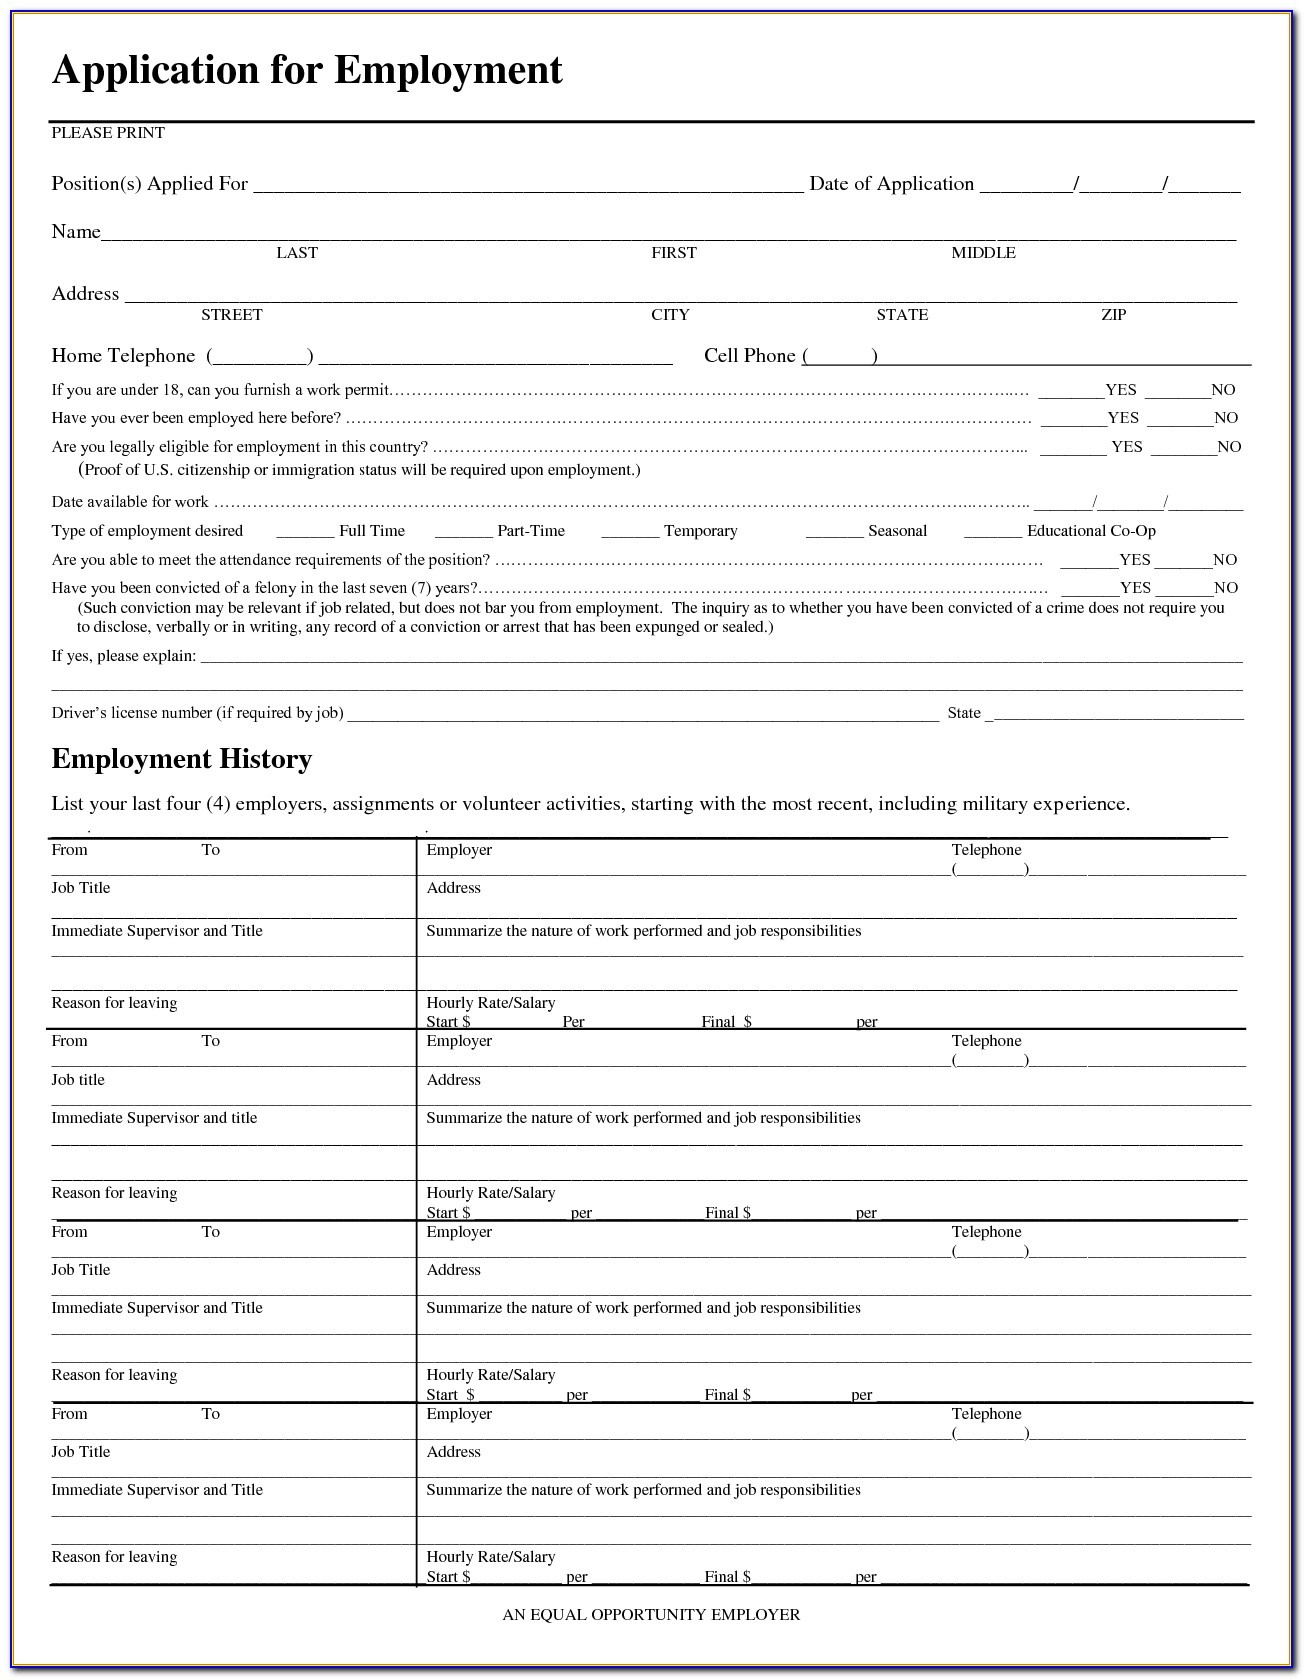 Employment Application Forms Free Printable - Form : Resume Examples - Free Printable Forms